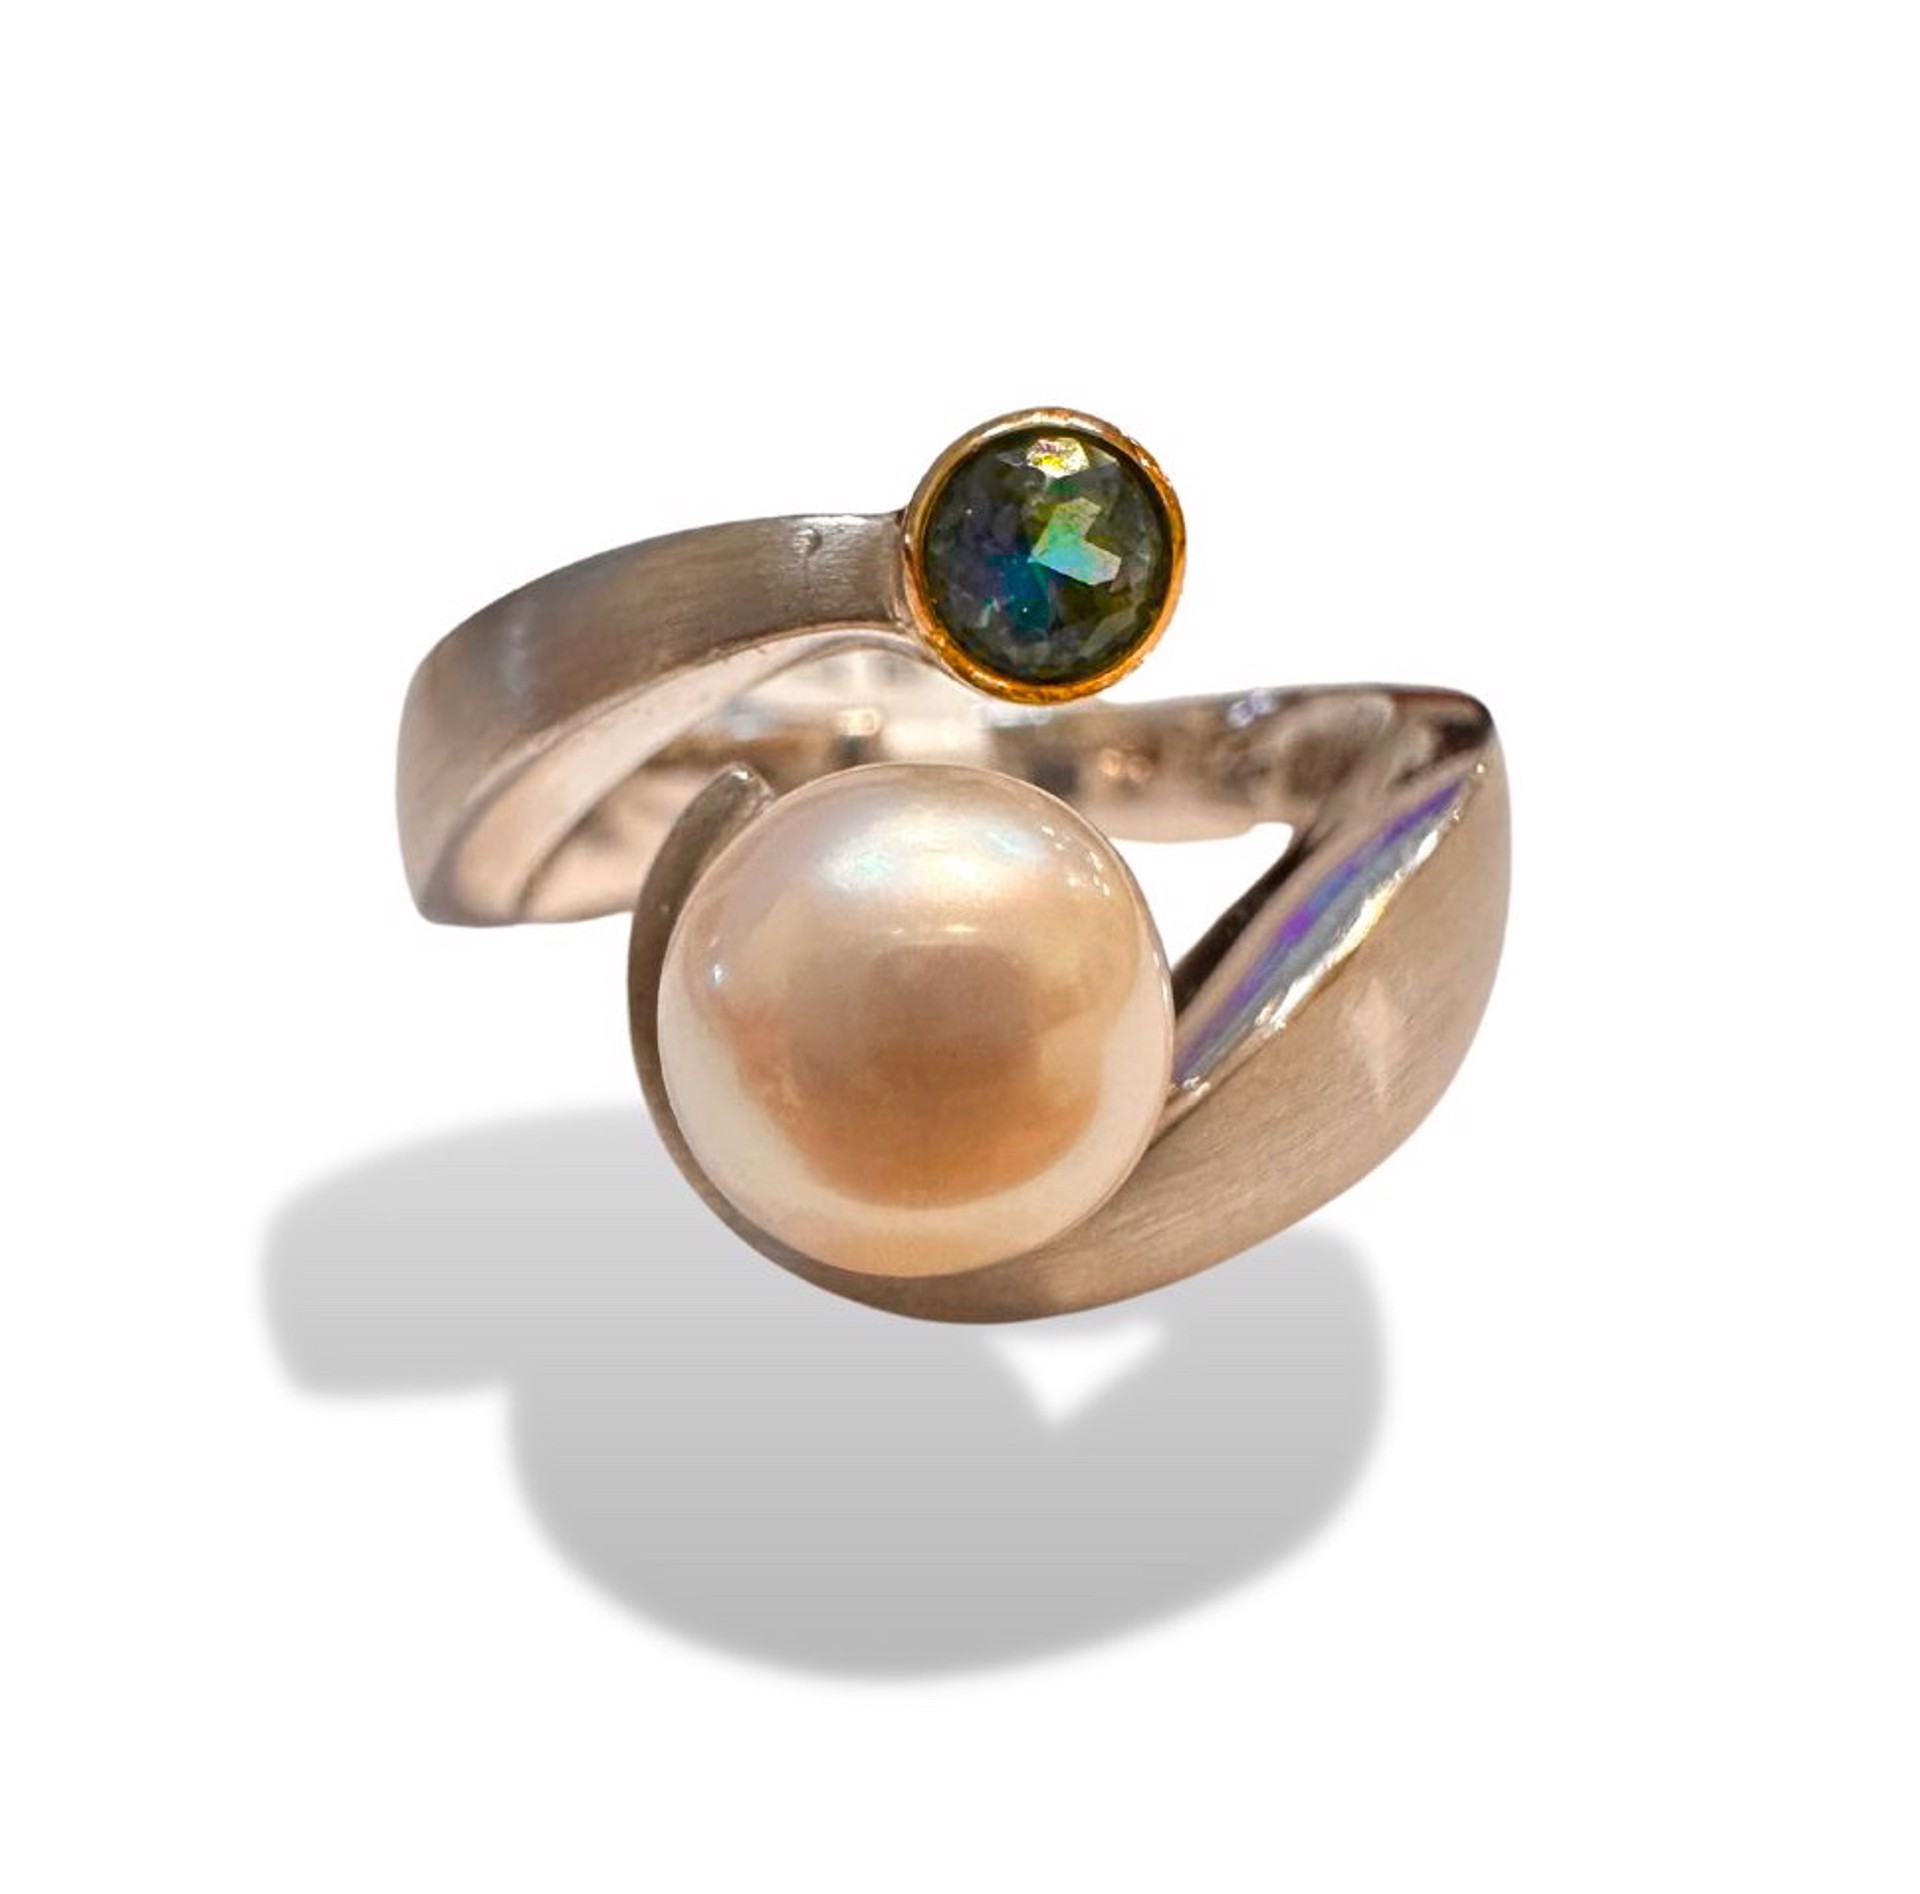 Ring - Adjustable Sterling Silver with Pearl and Blue Topaz R6962 by Joryel Vera